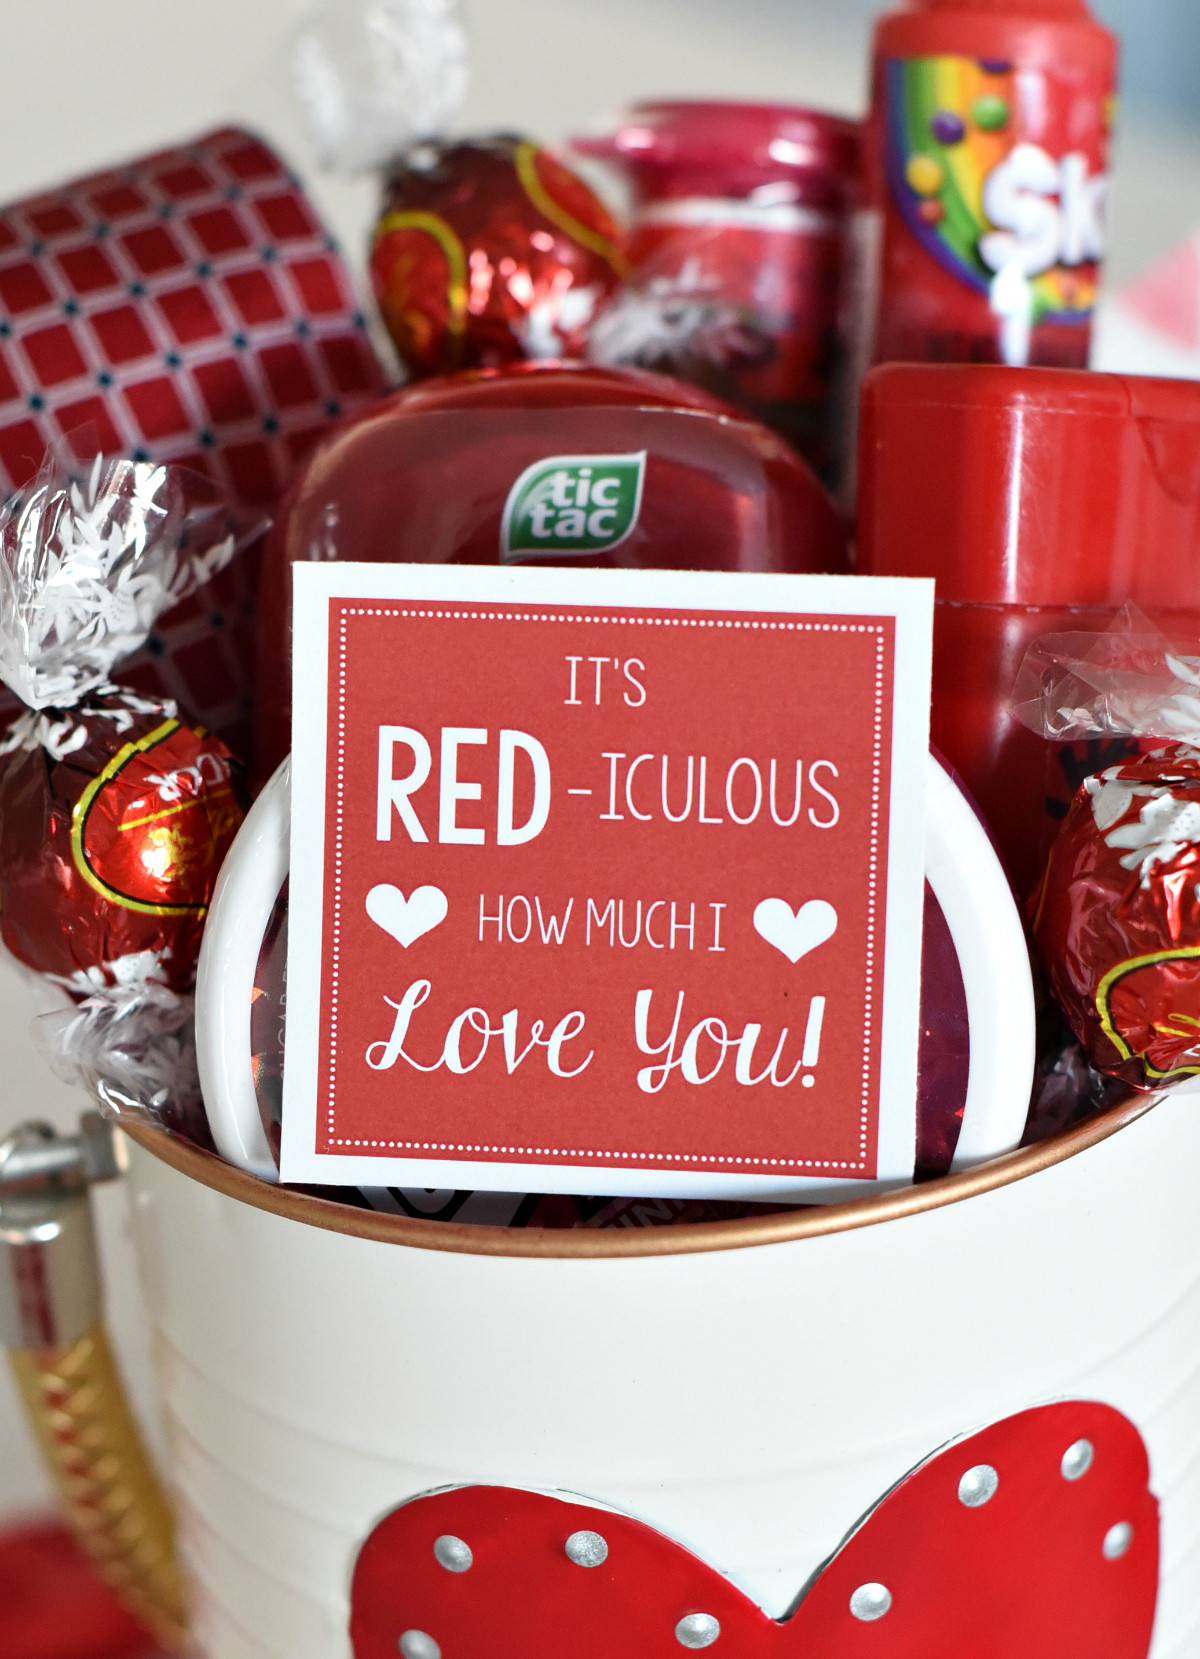 Cute Valentines Day Gifts Lovely Cute Valentine S Day Gift Idea Red Iculous Basket